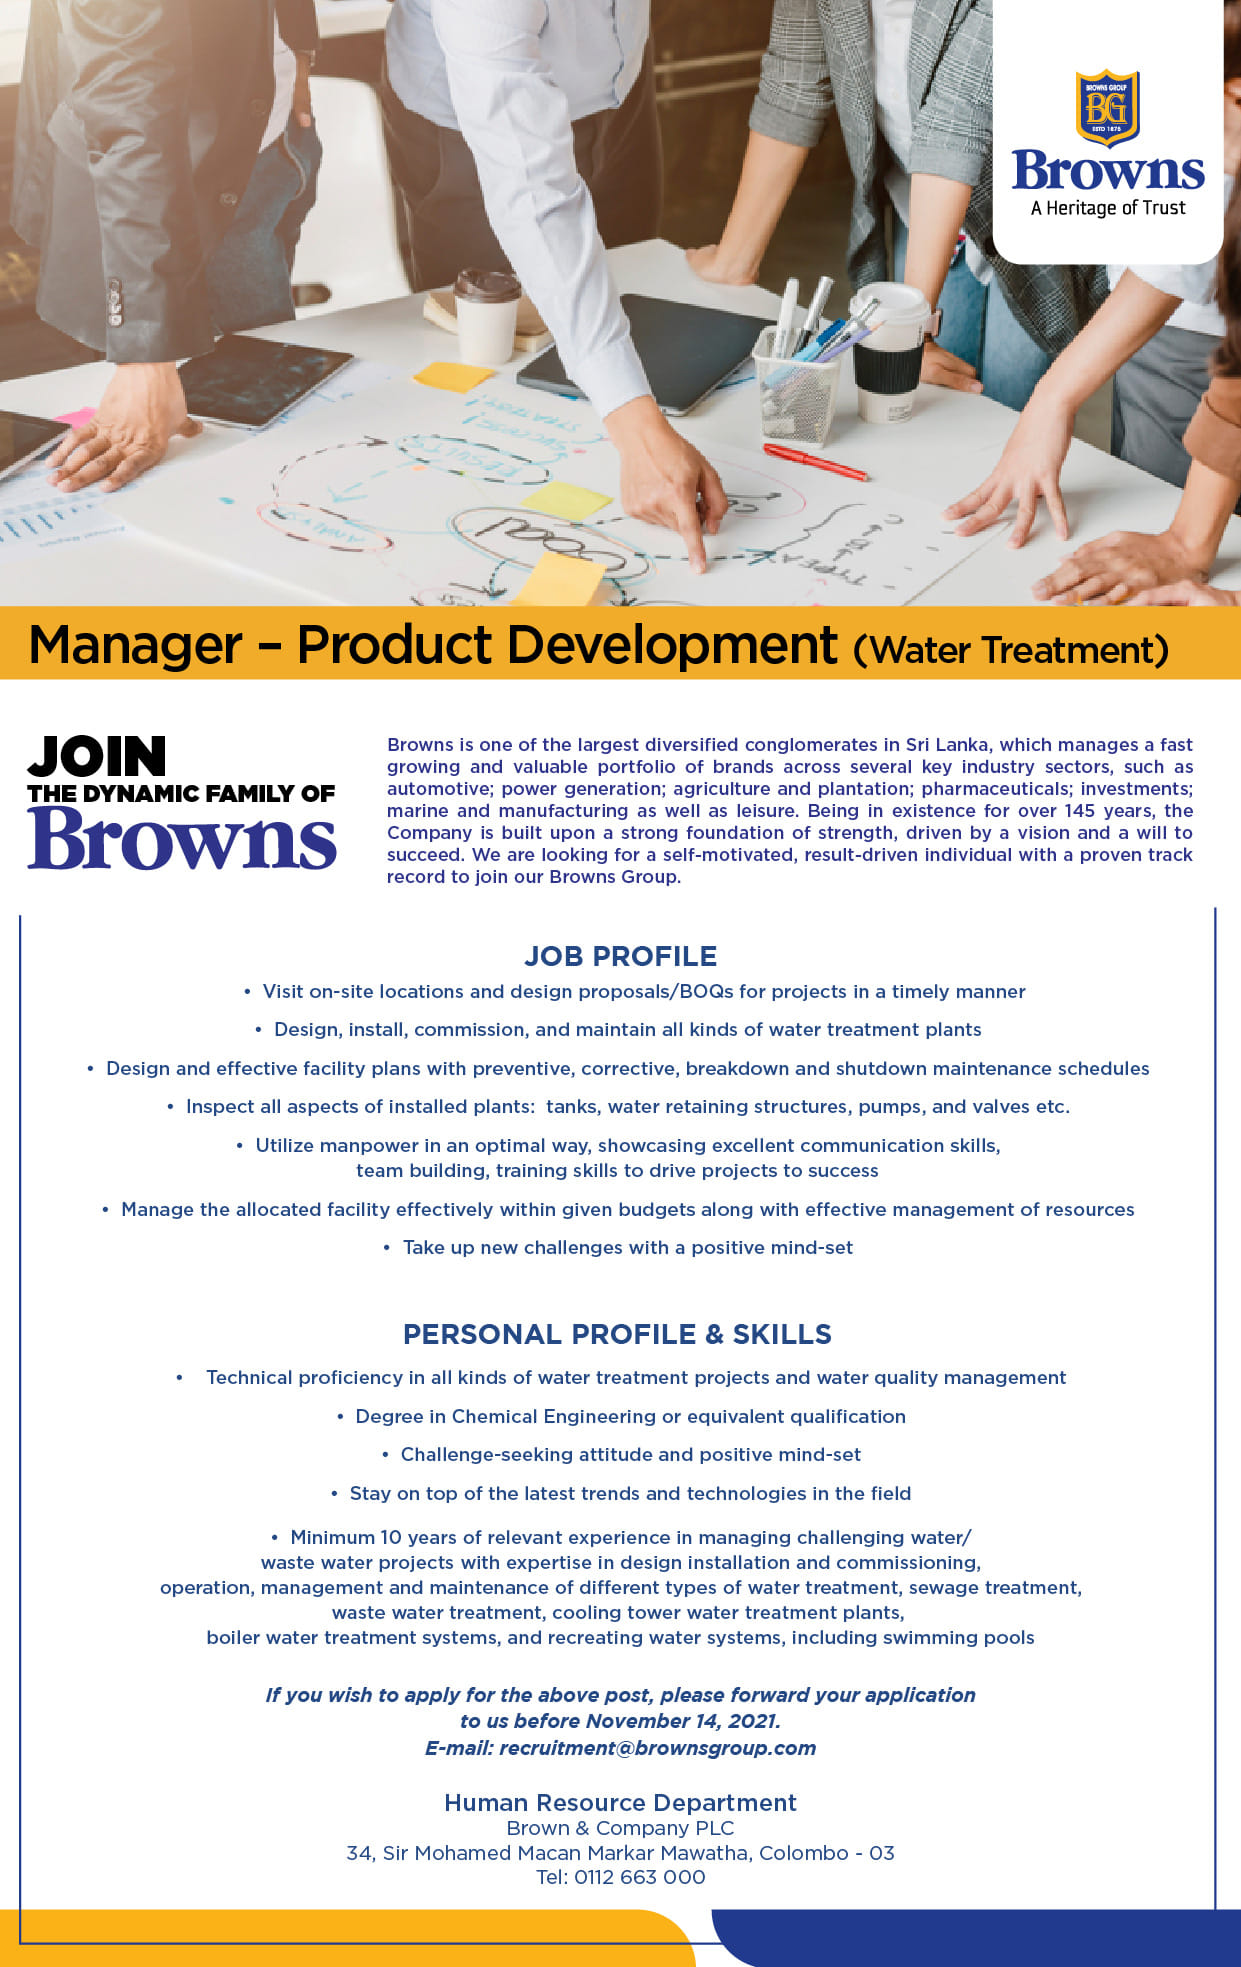 Manager (Product Development) Jobs Vacancies – Brown and Company Jobs Vacancy